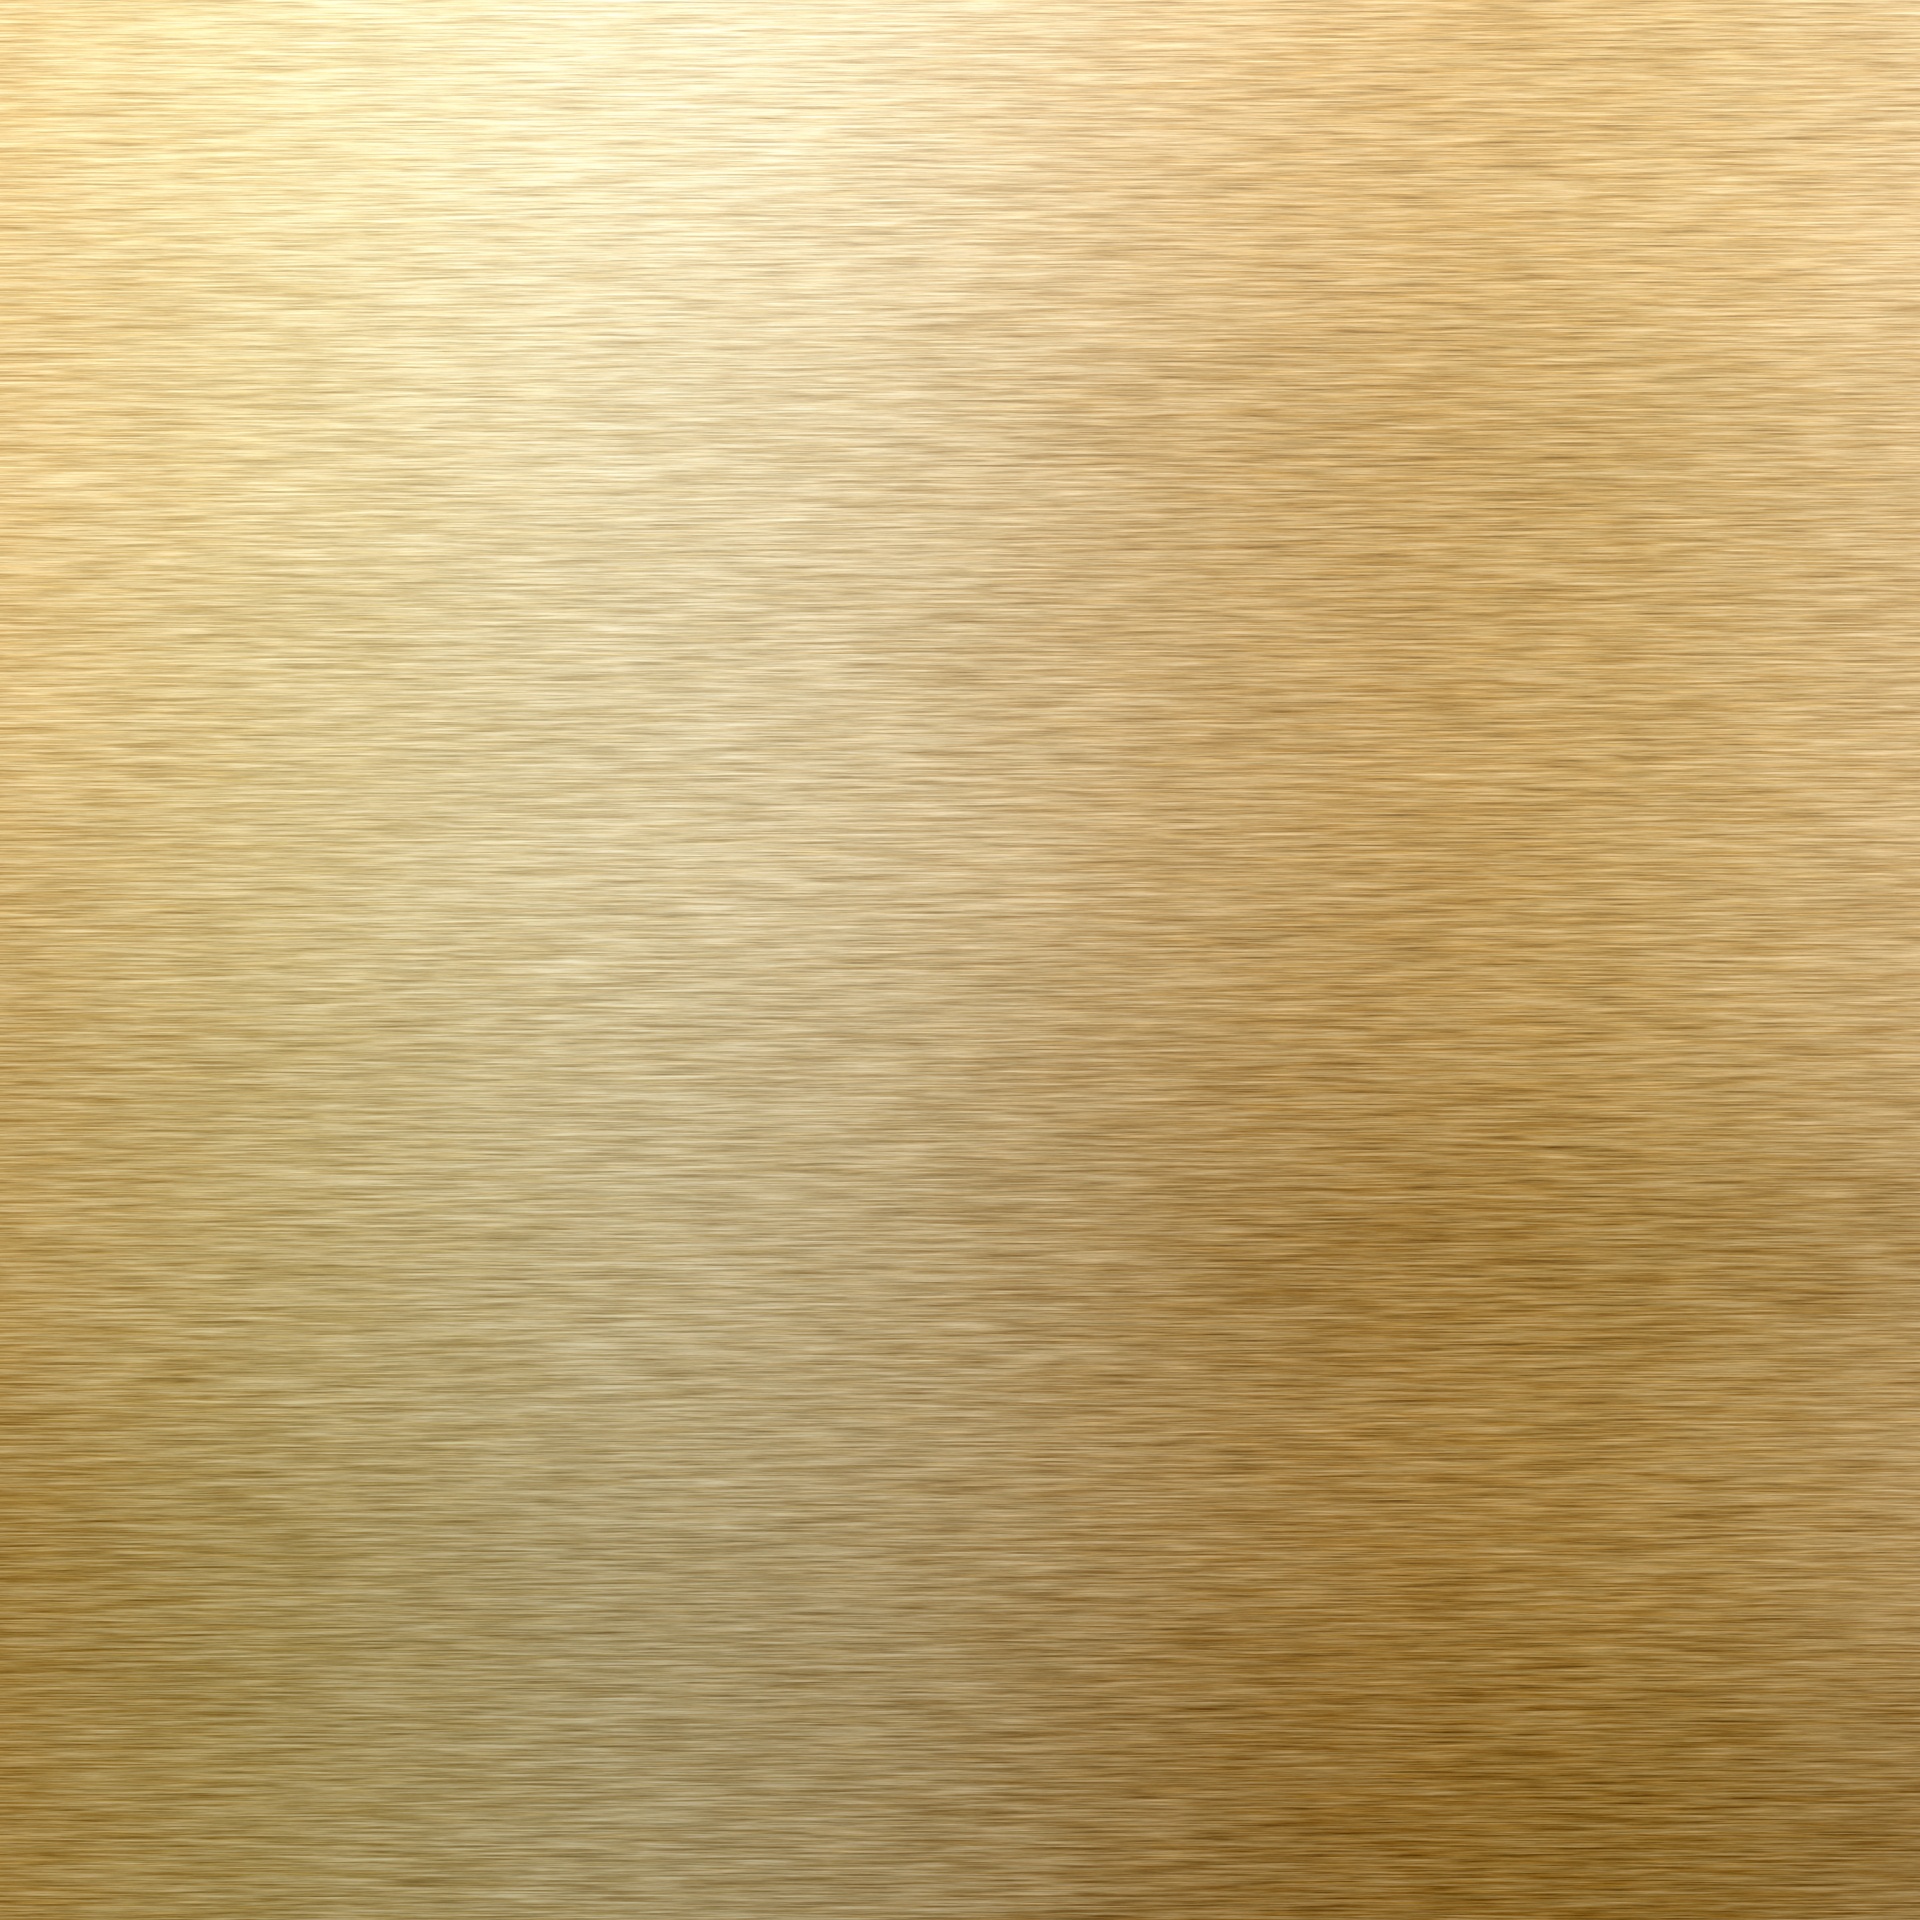 Background design with gold metallic texture with fine stripes for scrapbooking or others